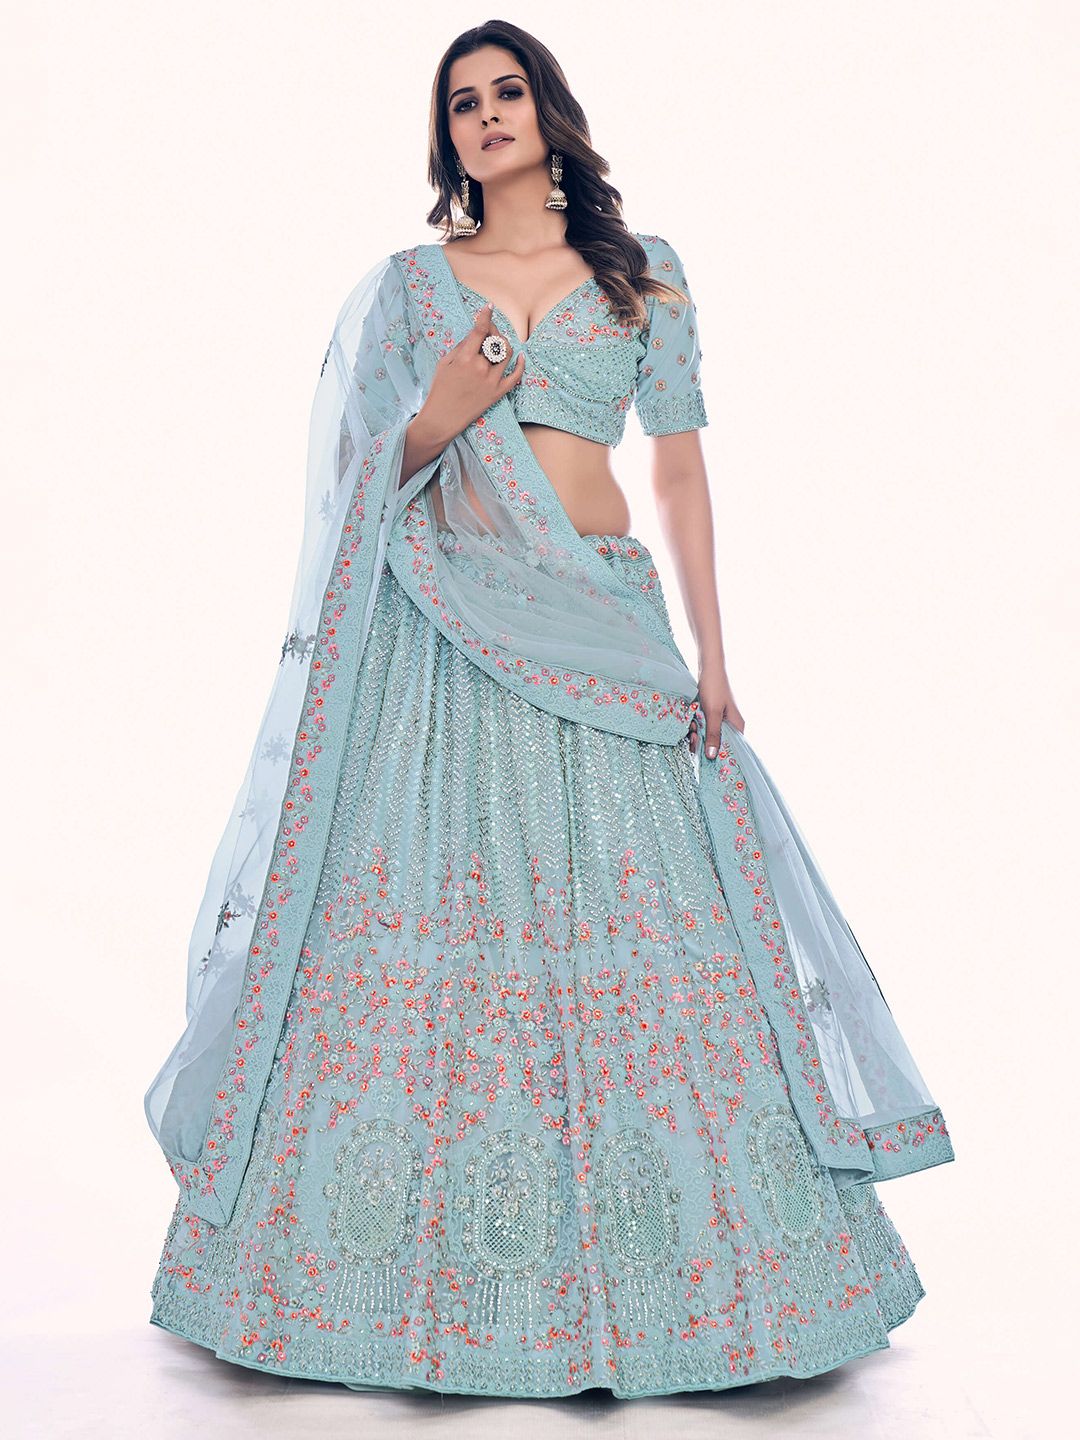 Fusionic Embroidered Thread Work Semi-Stitched Lehenga & Unstitched Blouse With Price in India